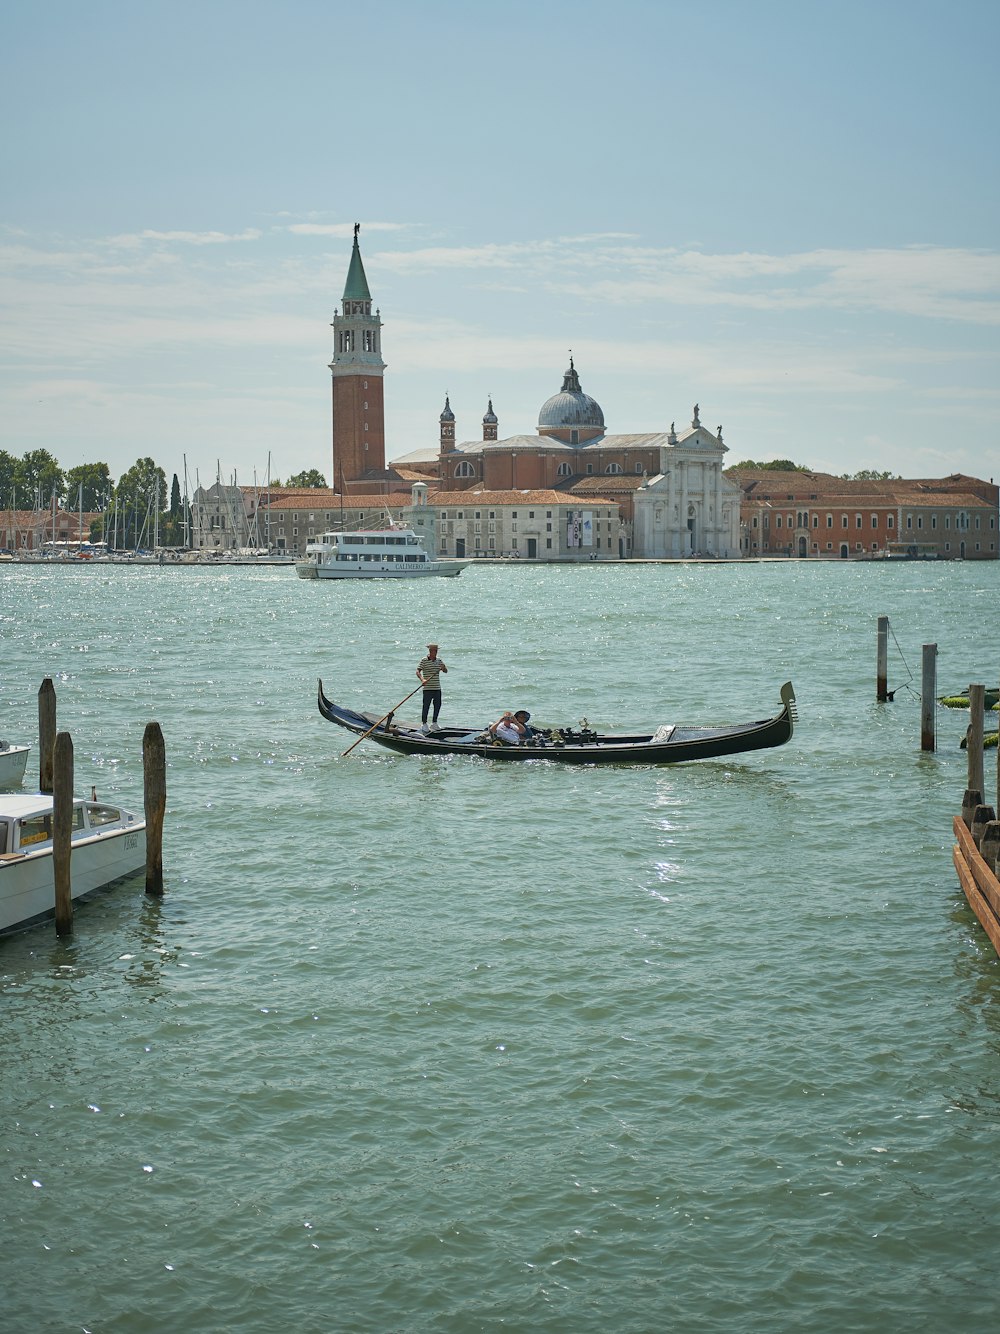 a gondola in the middle of a large body of water